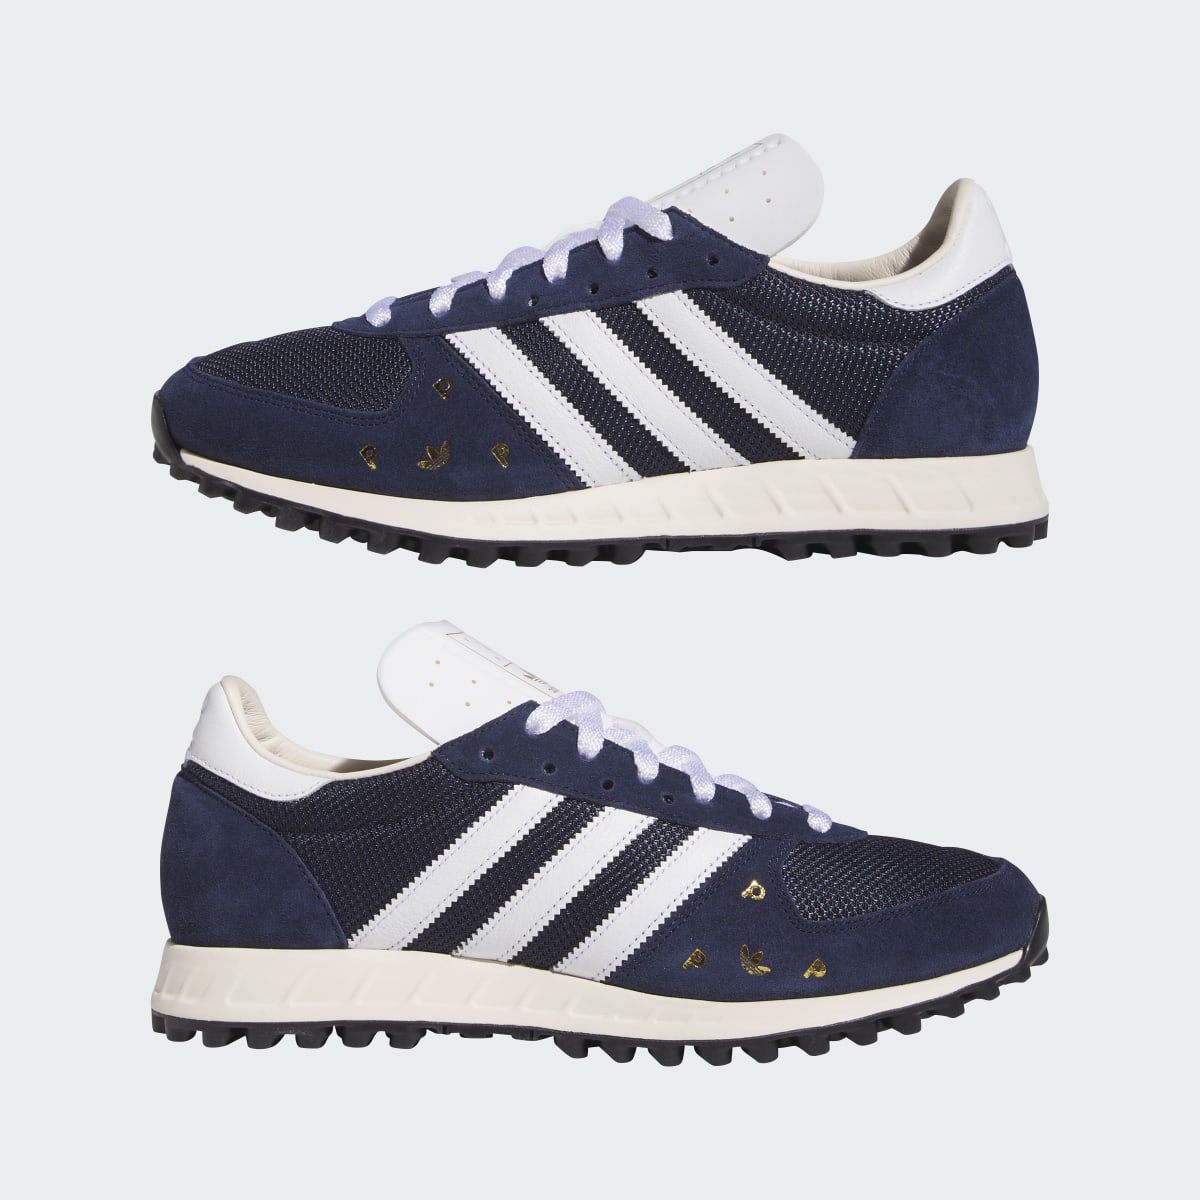 Adidas Pop Trading Co TRX Trainers. 9